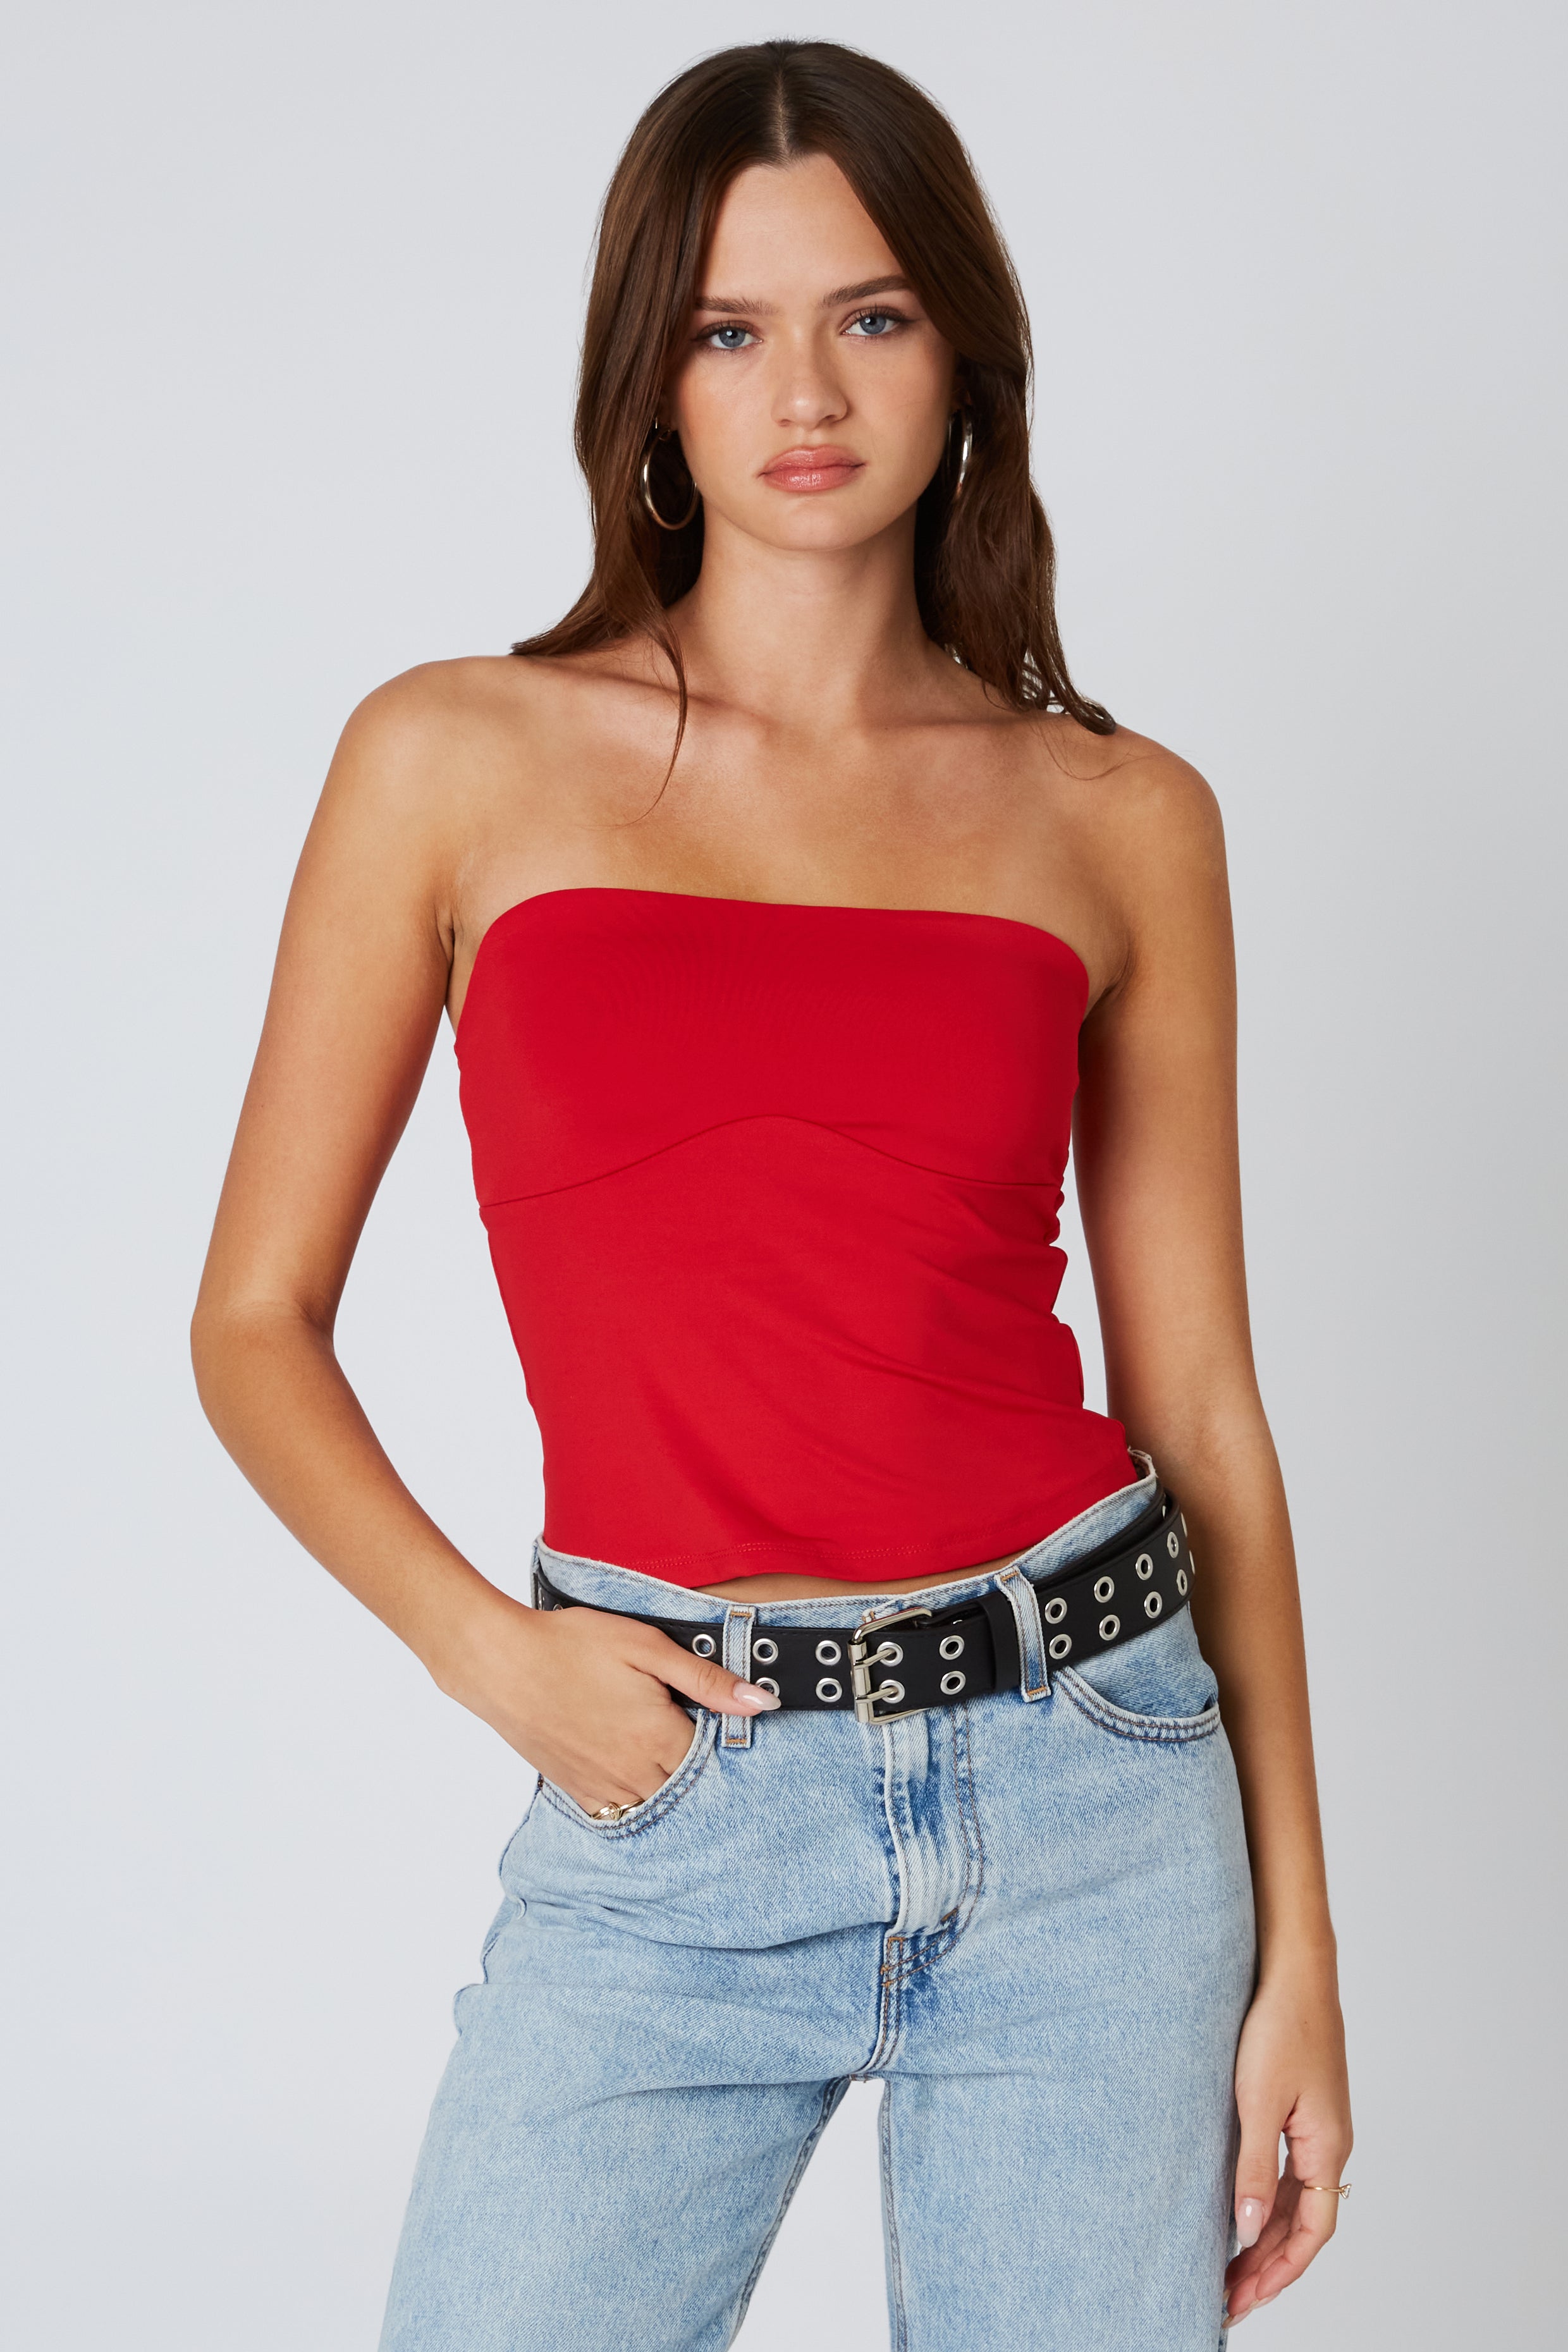 Slinky Tube Top in Red Front View